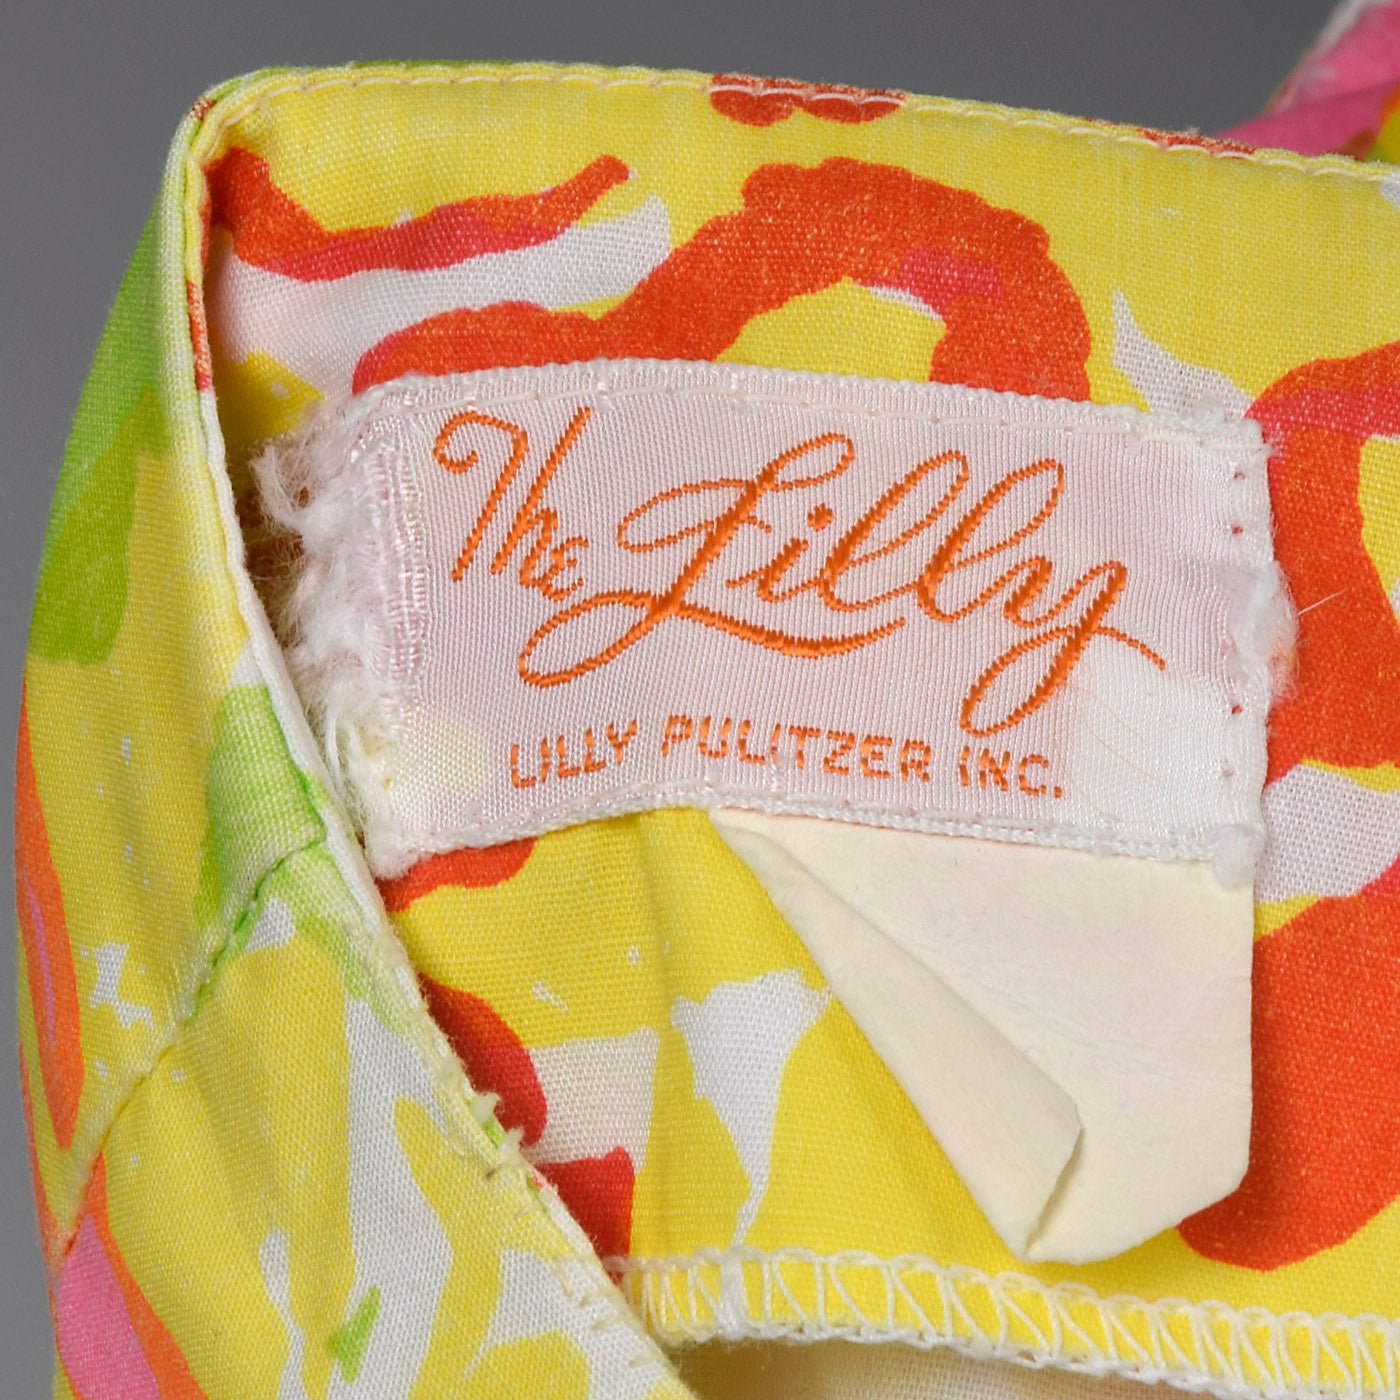 1970s Lilly Pulitzer Colorful Print Faux Wrap Mini Skirt